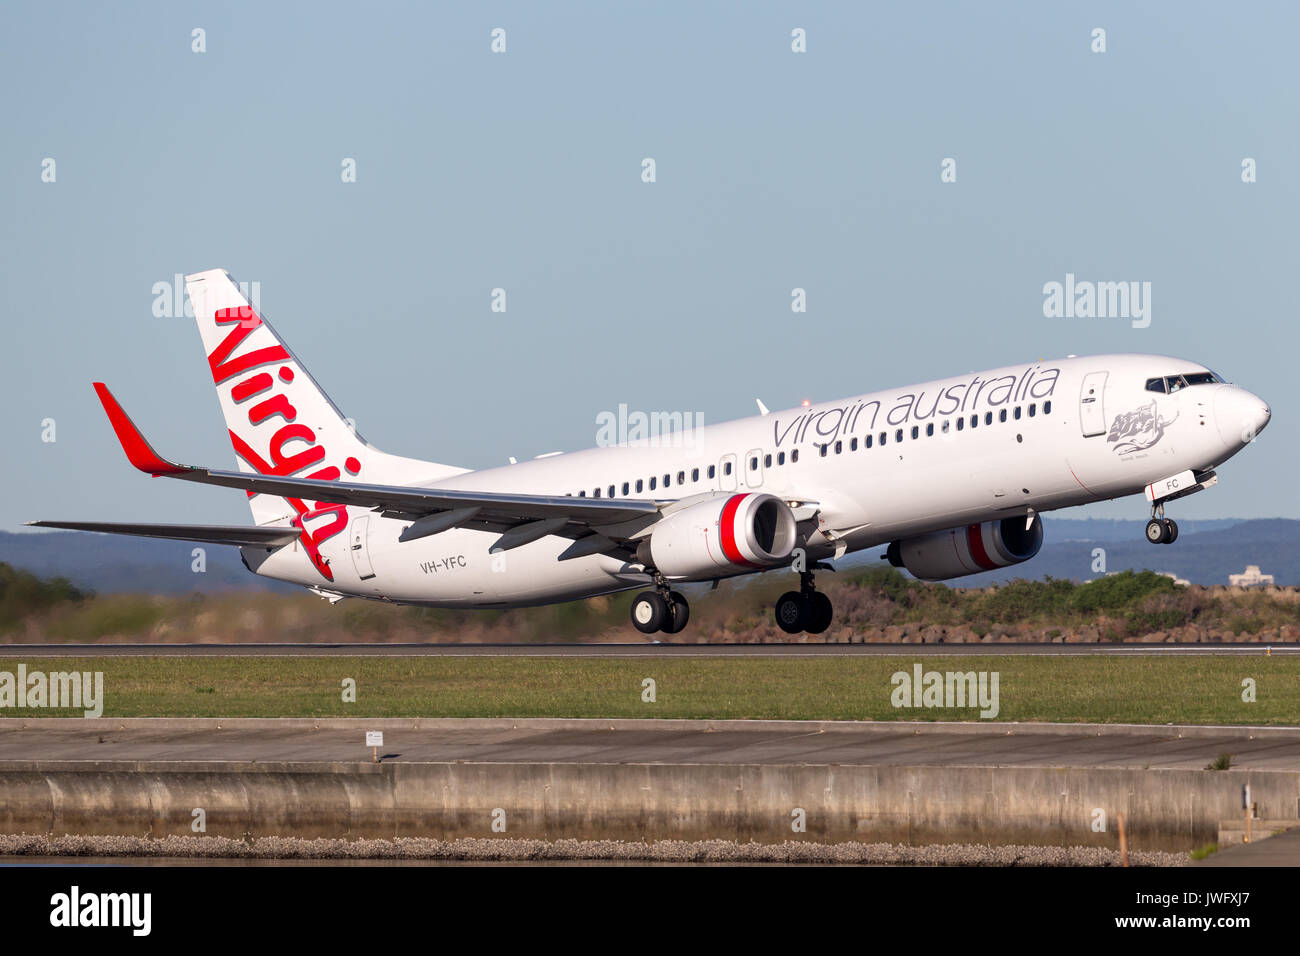 Virgin Australia Airlines Boeing 737-800 aircraft taking off from Sydney Airport. Stock Photo